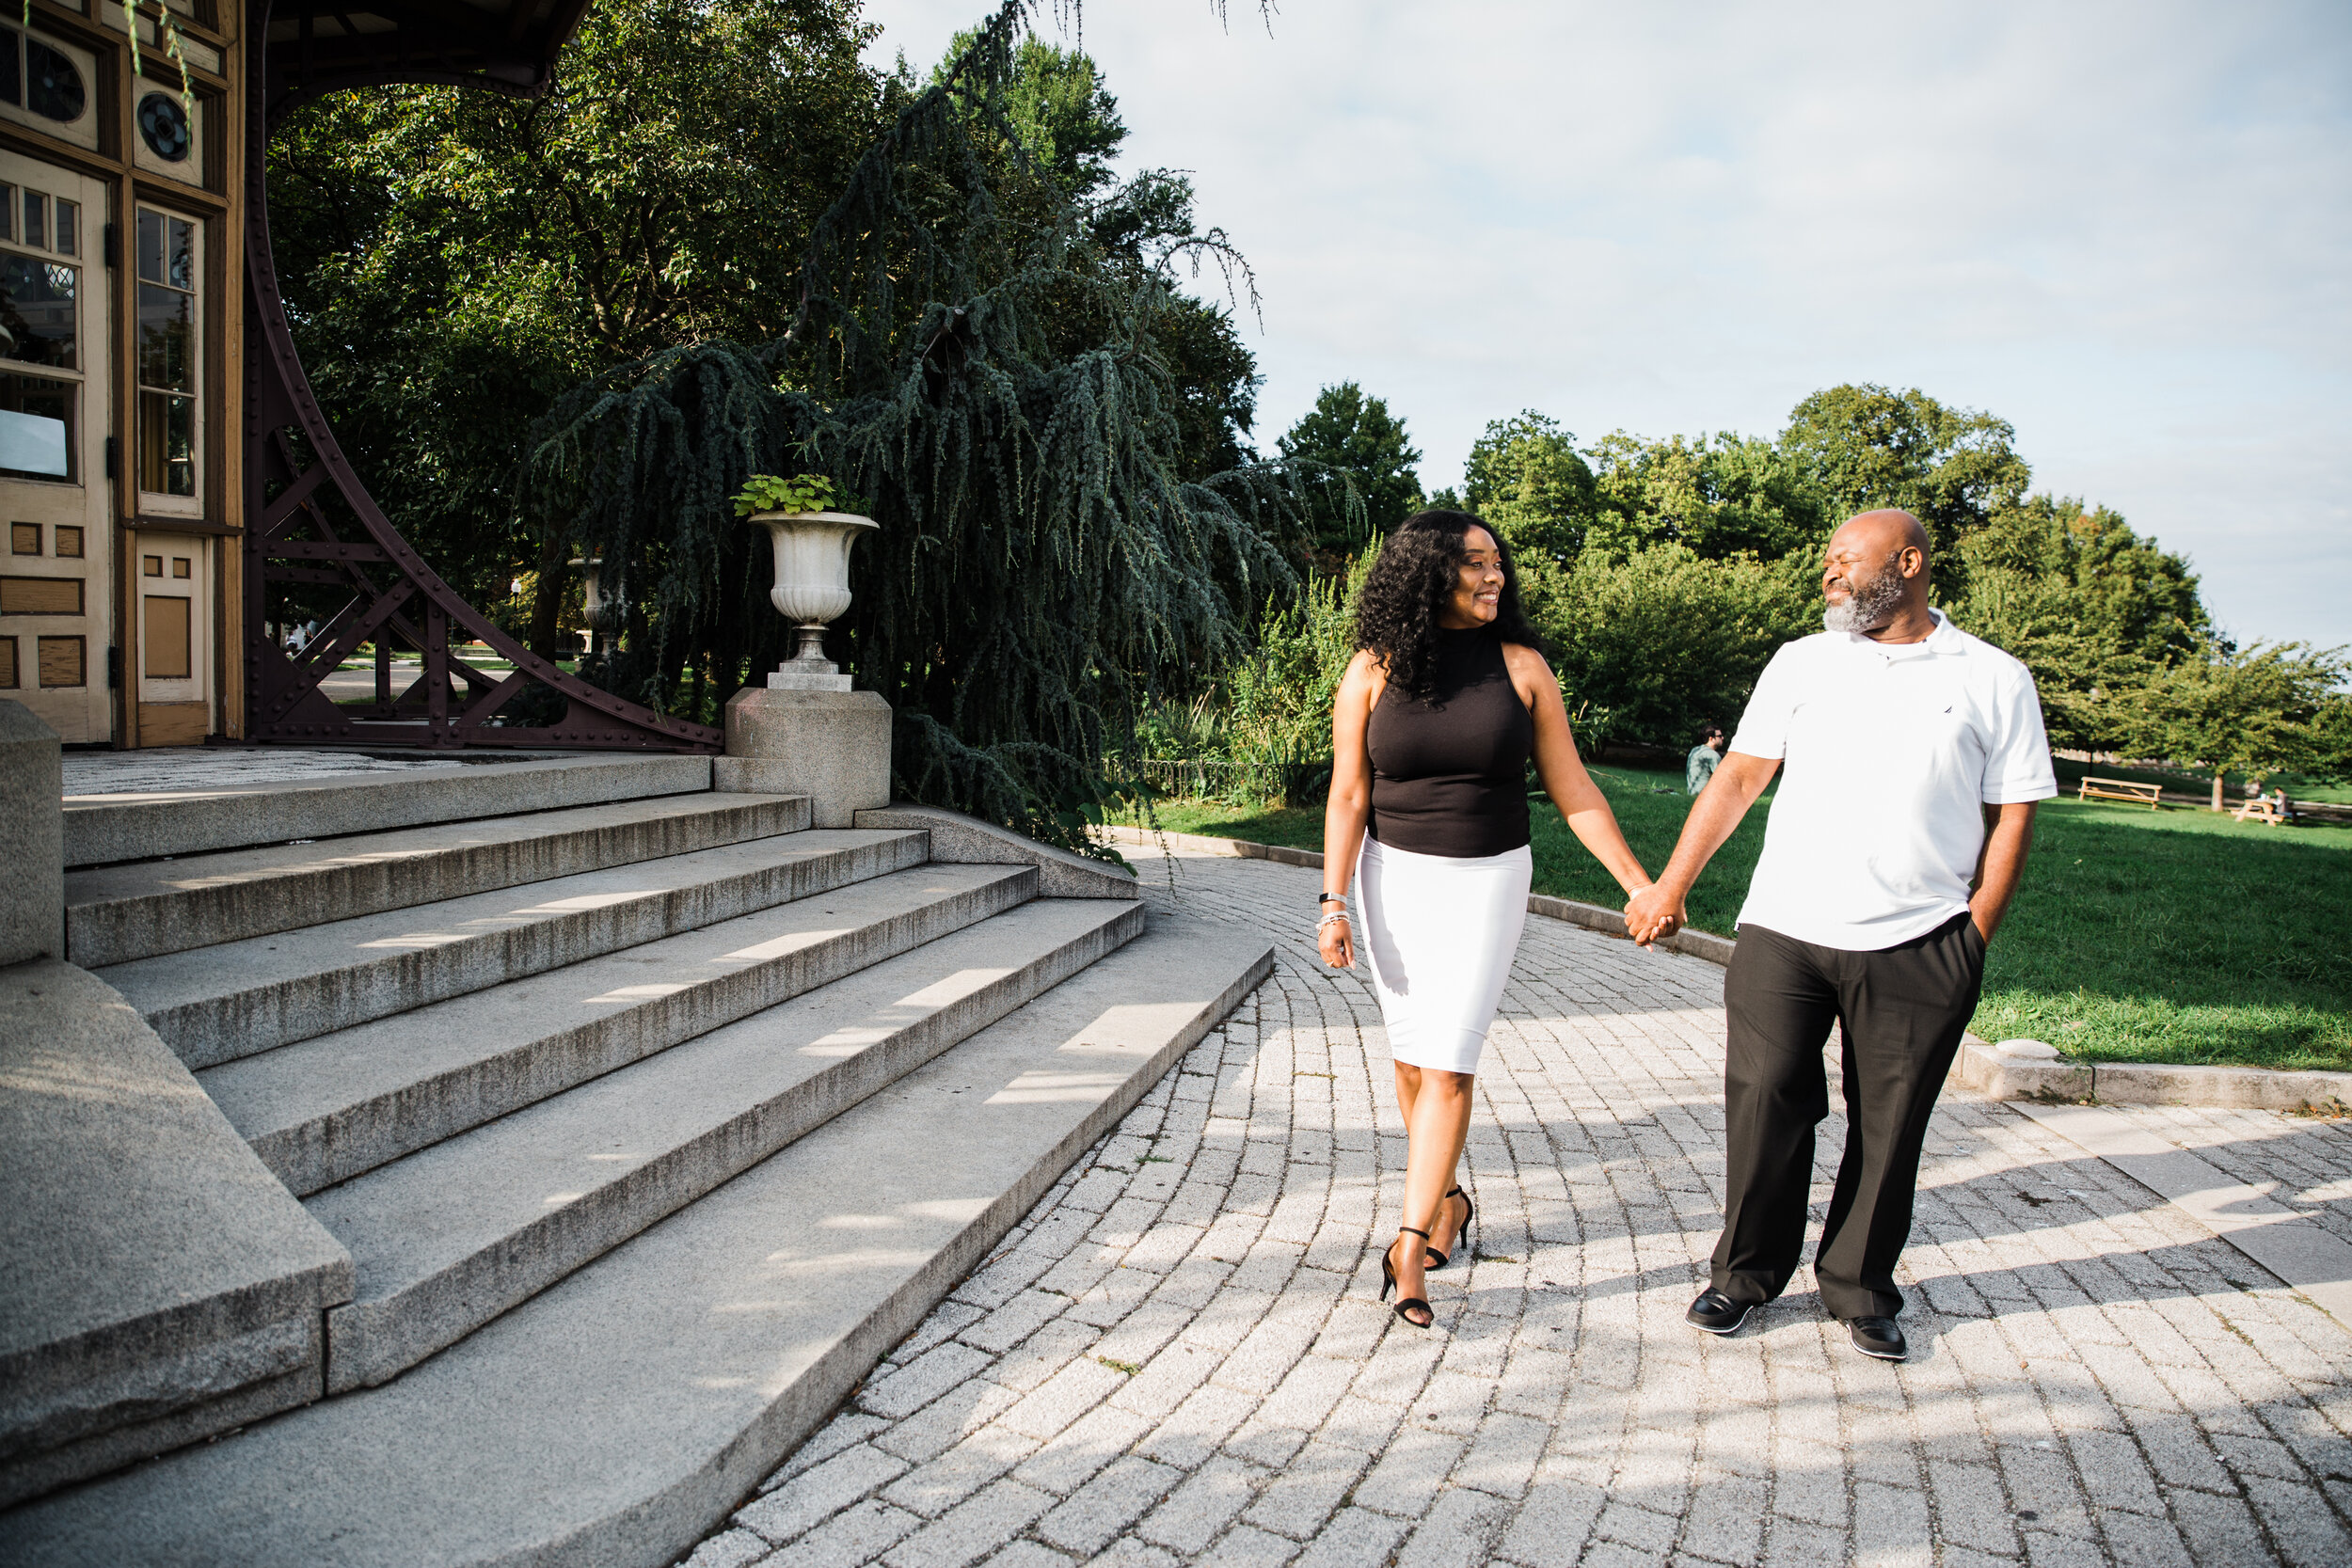 Patterson Park Engagement Session with Black Photographers Megapixels media in Baltimore Maryland (15 of 32).jpg